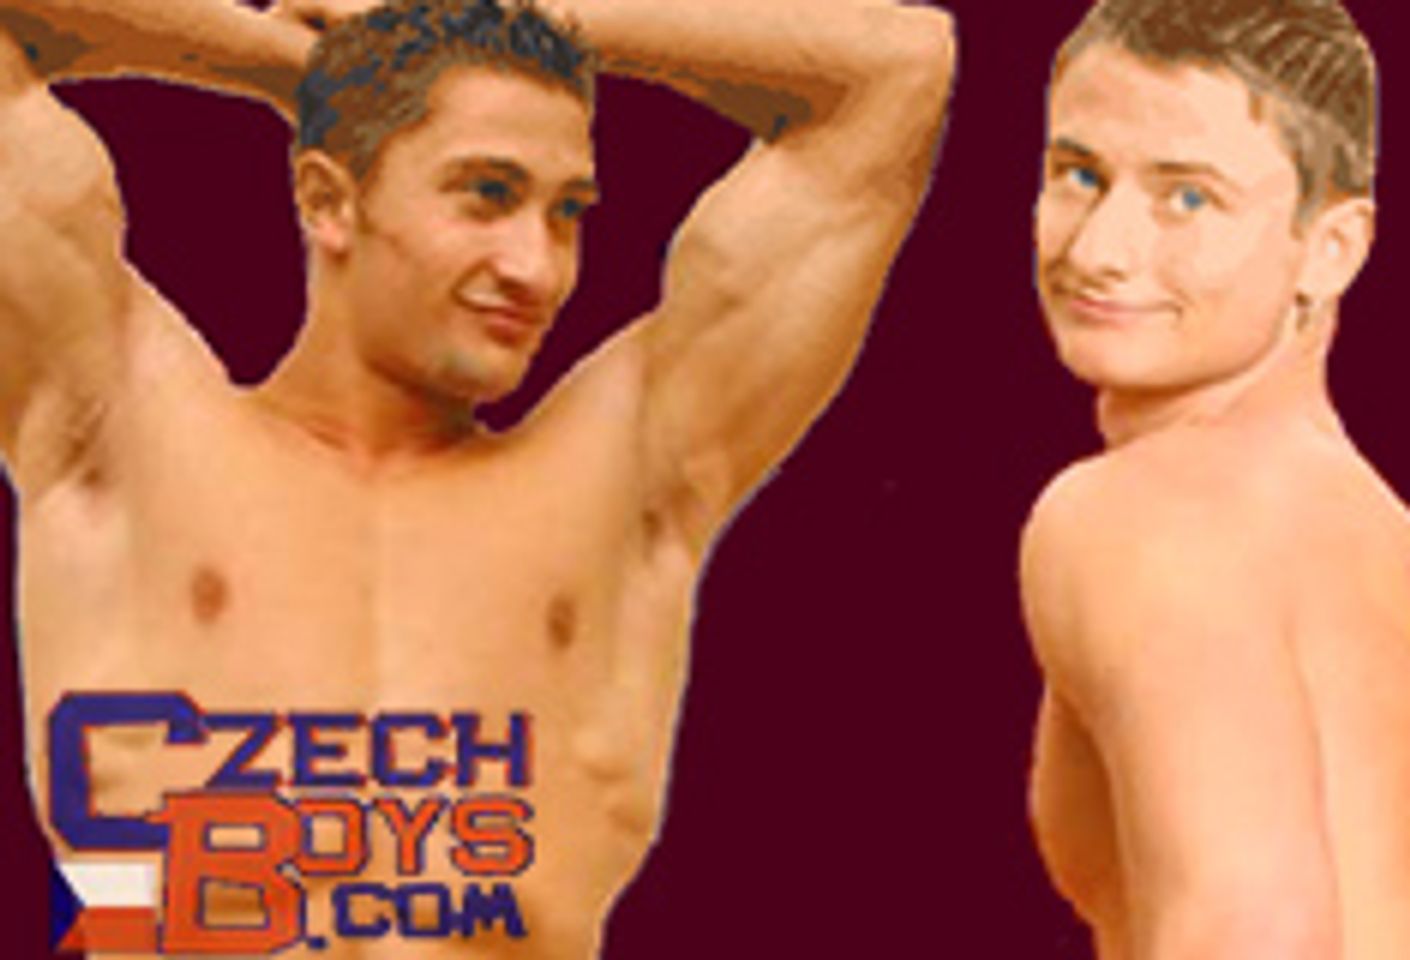 CzechBoys Launches Largest Multi-Language Tour of Gay Porn